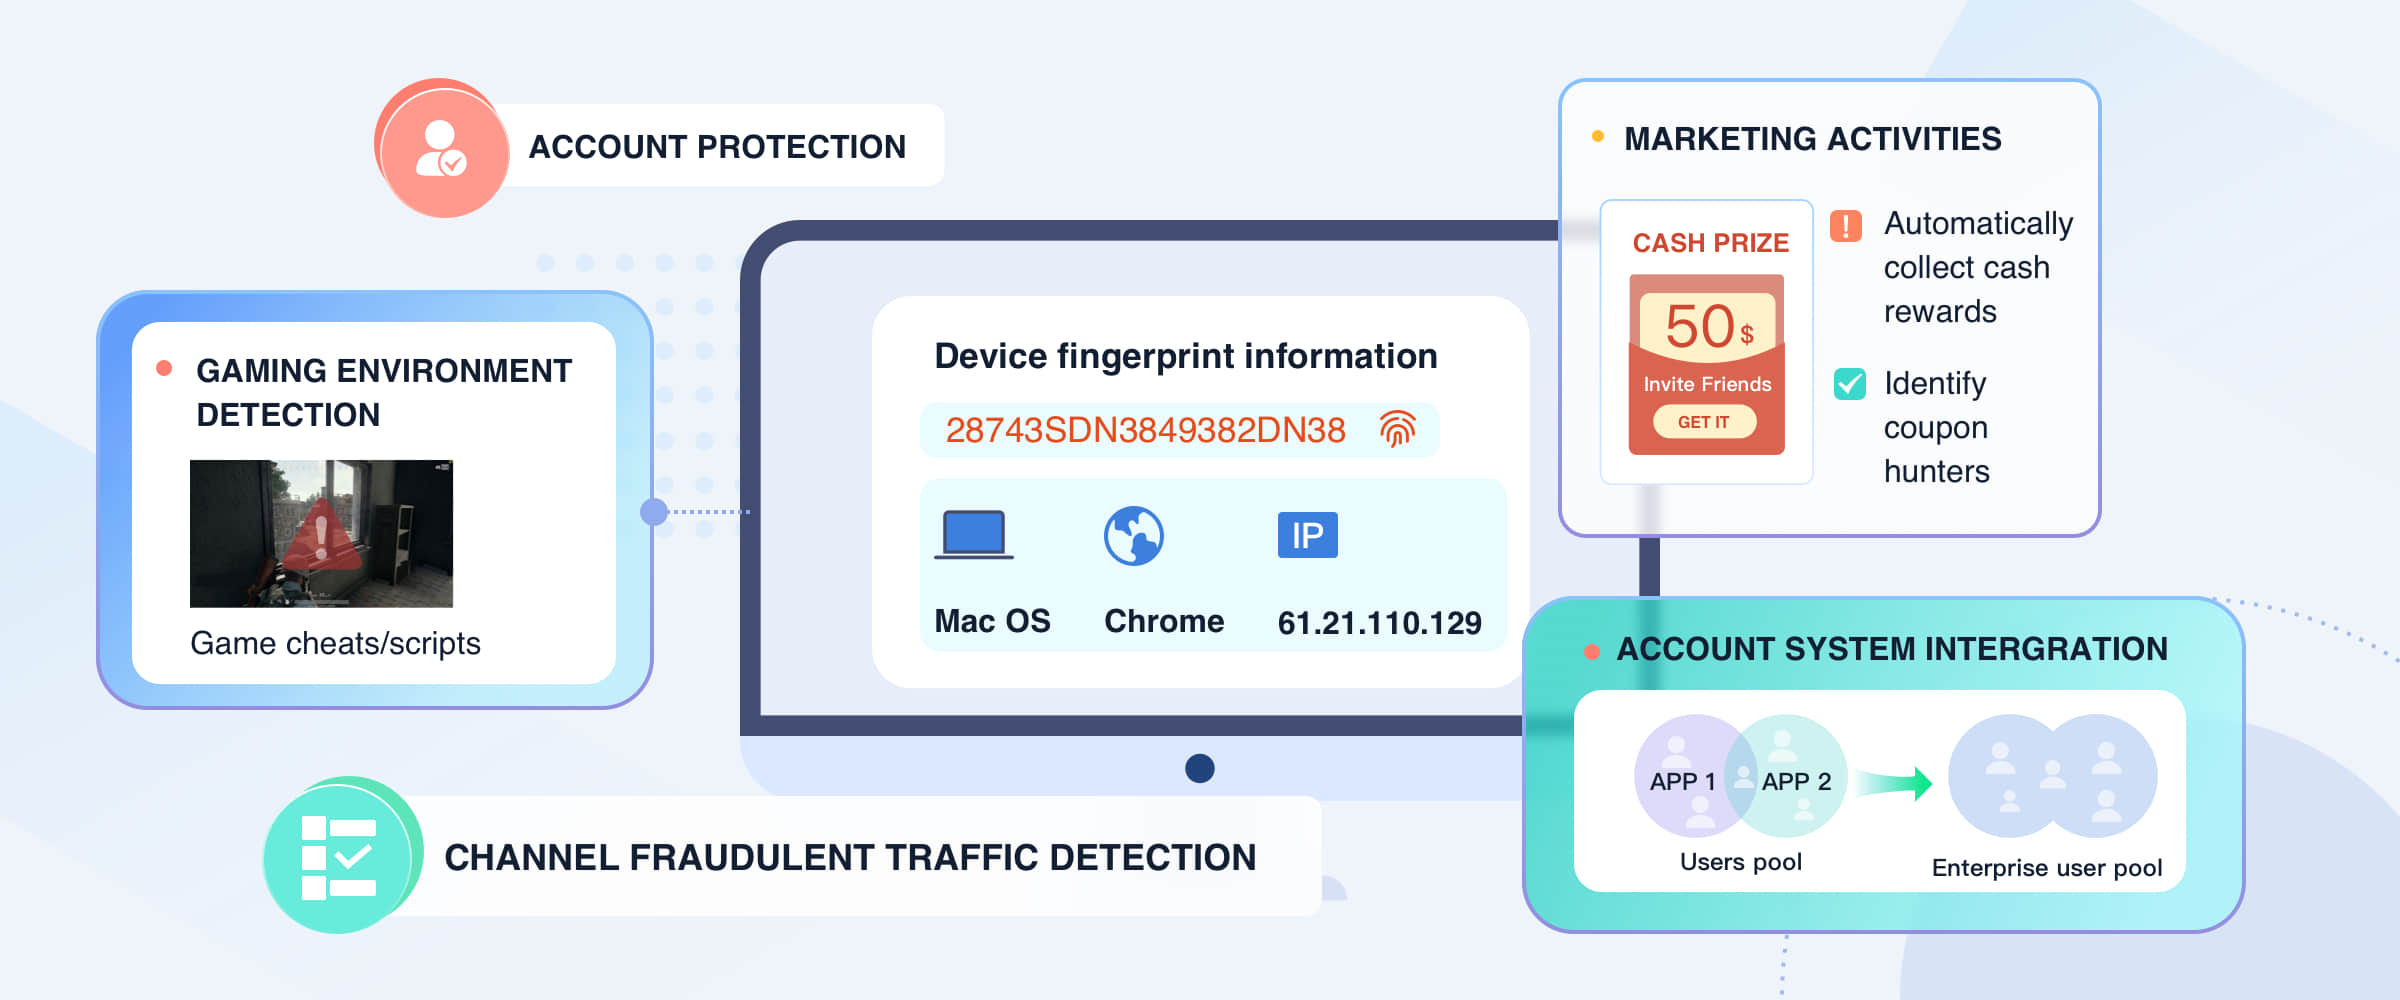 Device fingerprinting features including identifying device information, fake users, fraudulent activities, and fake registrations and logins